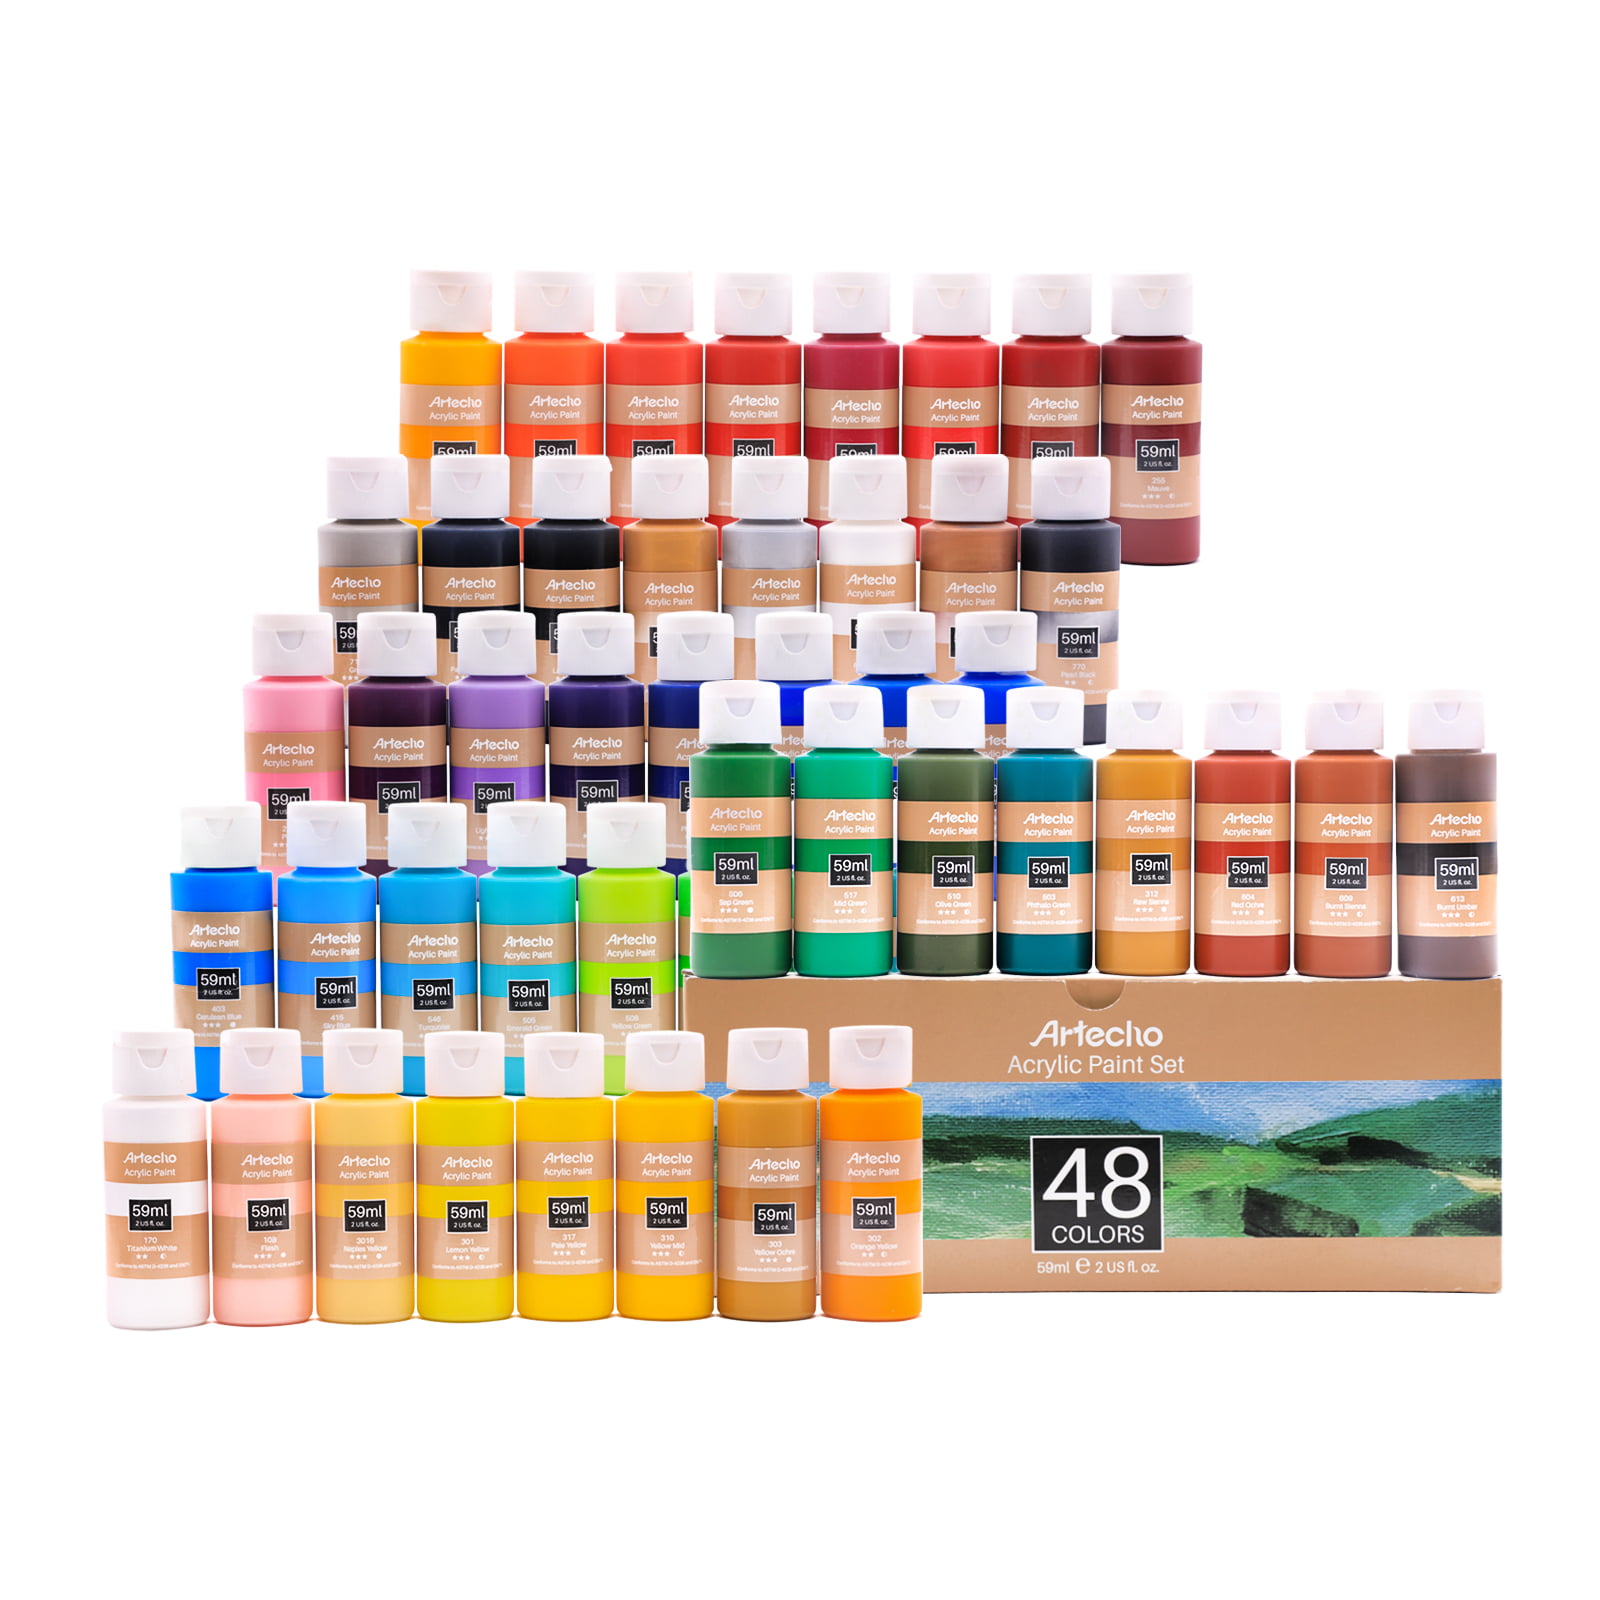 Artecho Acrylic Paint Set of 48 Color Paints, 2Ounce/59ml Vibrant Acrylic  Paint for Art Paint, Decorate, Supplies for Wood, Fabric, Crafts, Canvas,  Leather&Stone 